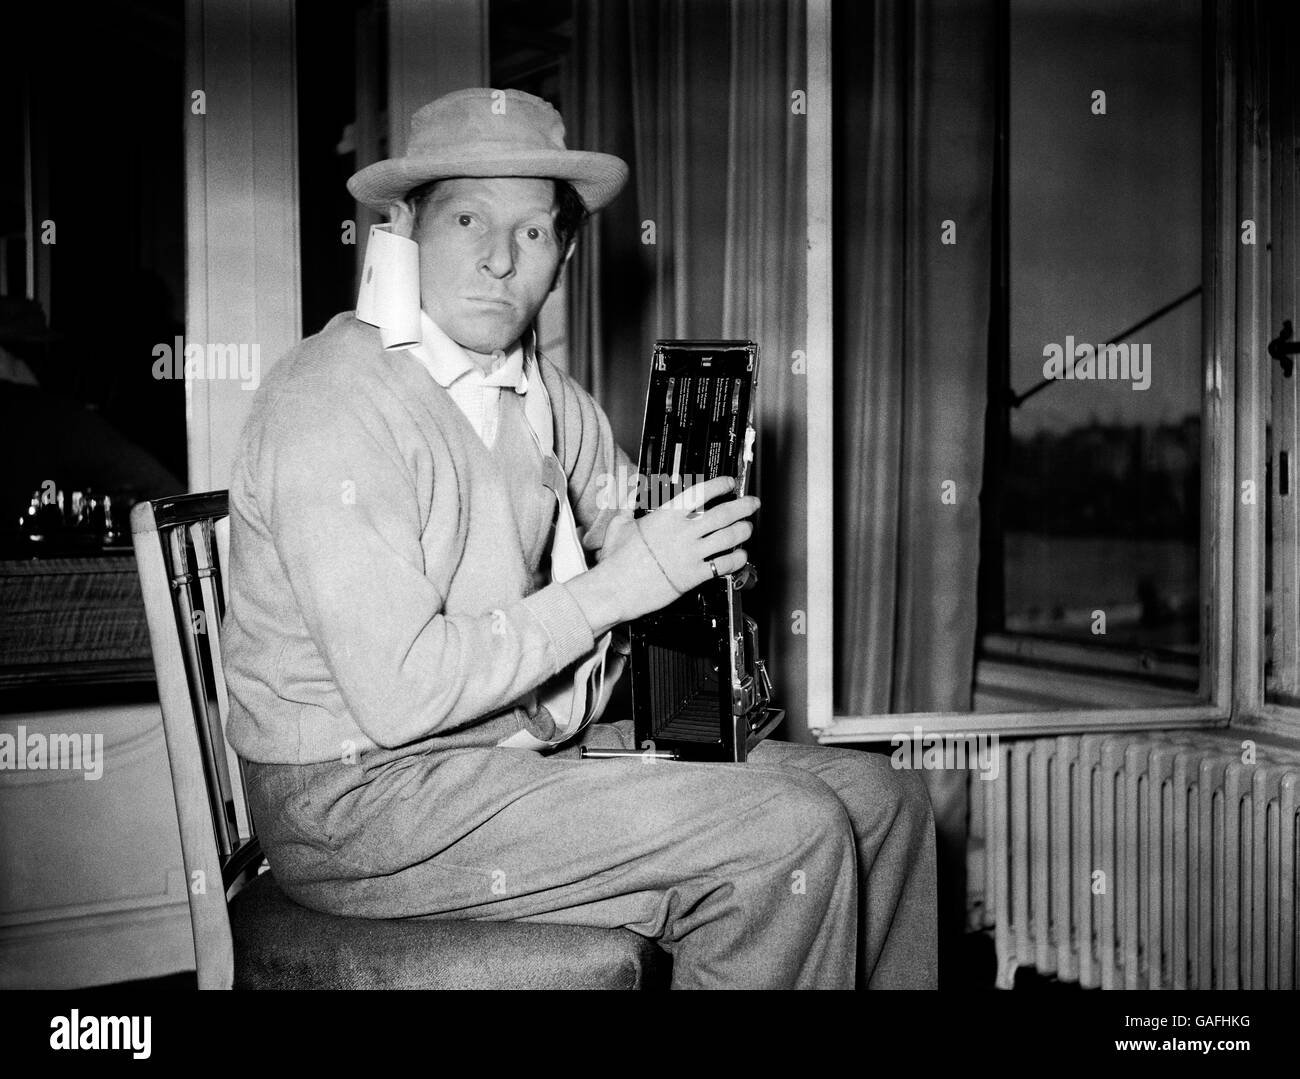 That great American comedian Danny Kaye was in something of a quandary when the photographer went along to his London hotel to photograph him. Somehow or other the camera he owns - a Polaroid Land Camera - got all mixed up and he found himself with the roll of film draped round his neck. Stock Photo